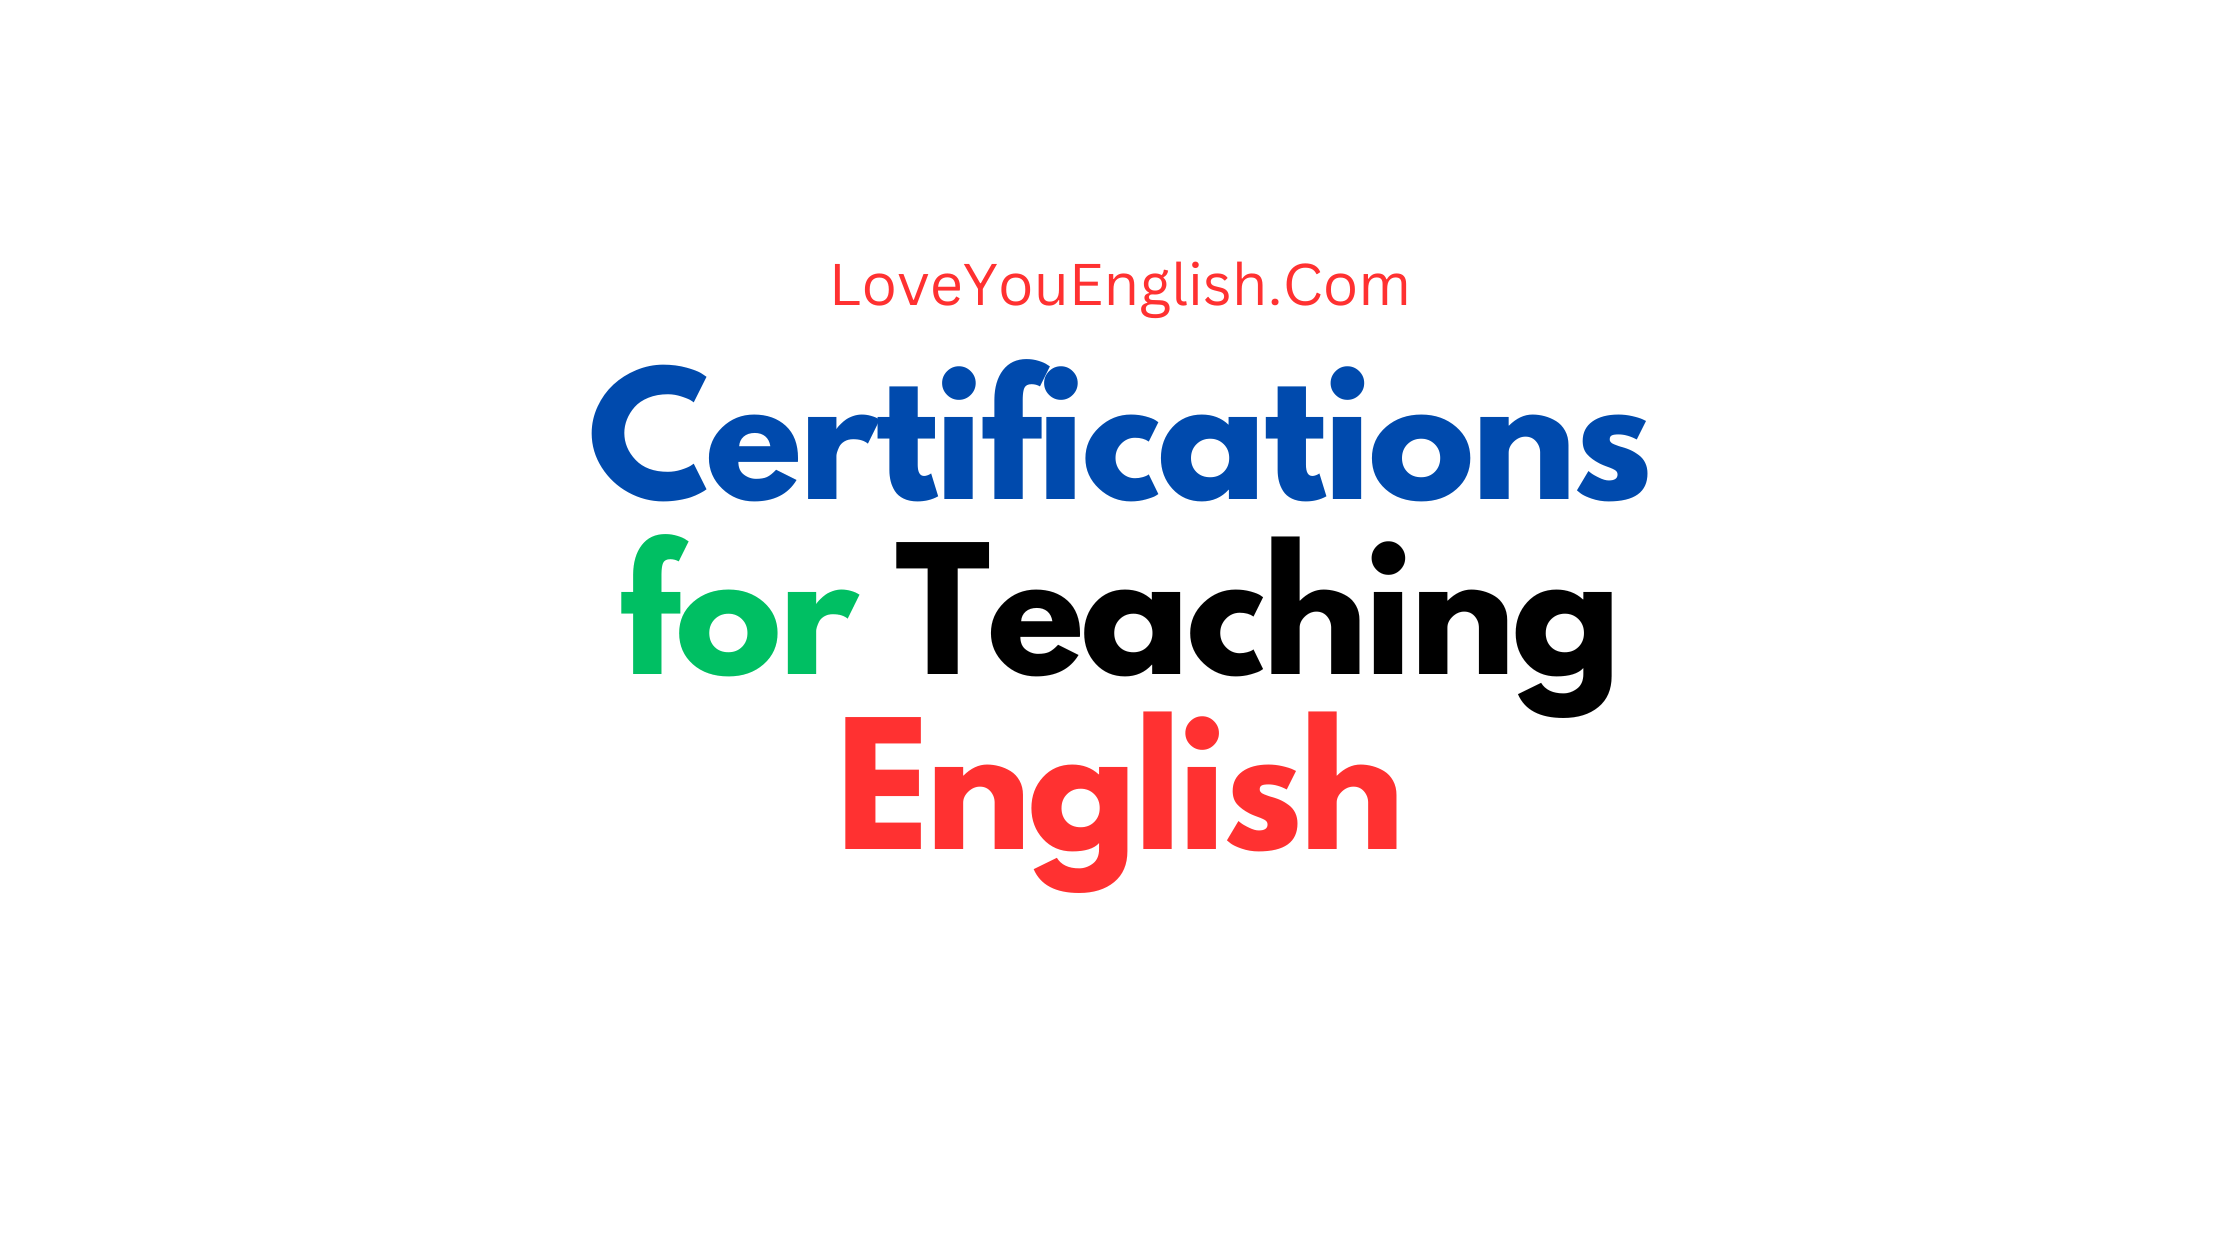 Certifications for Teaching English